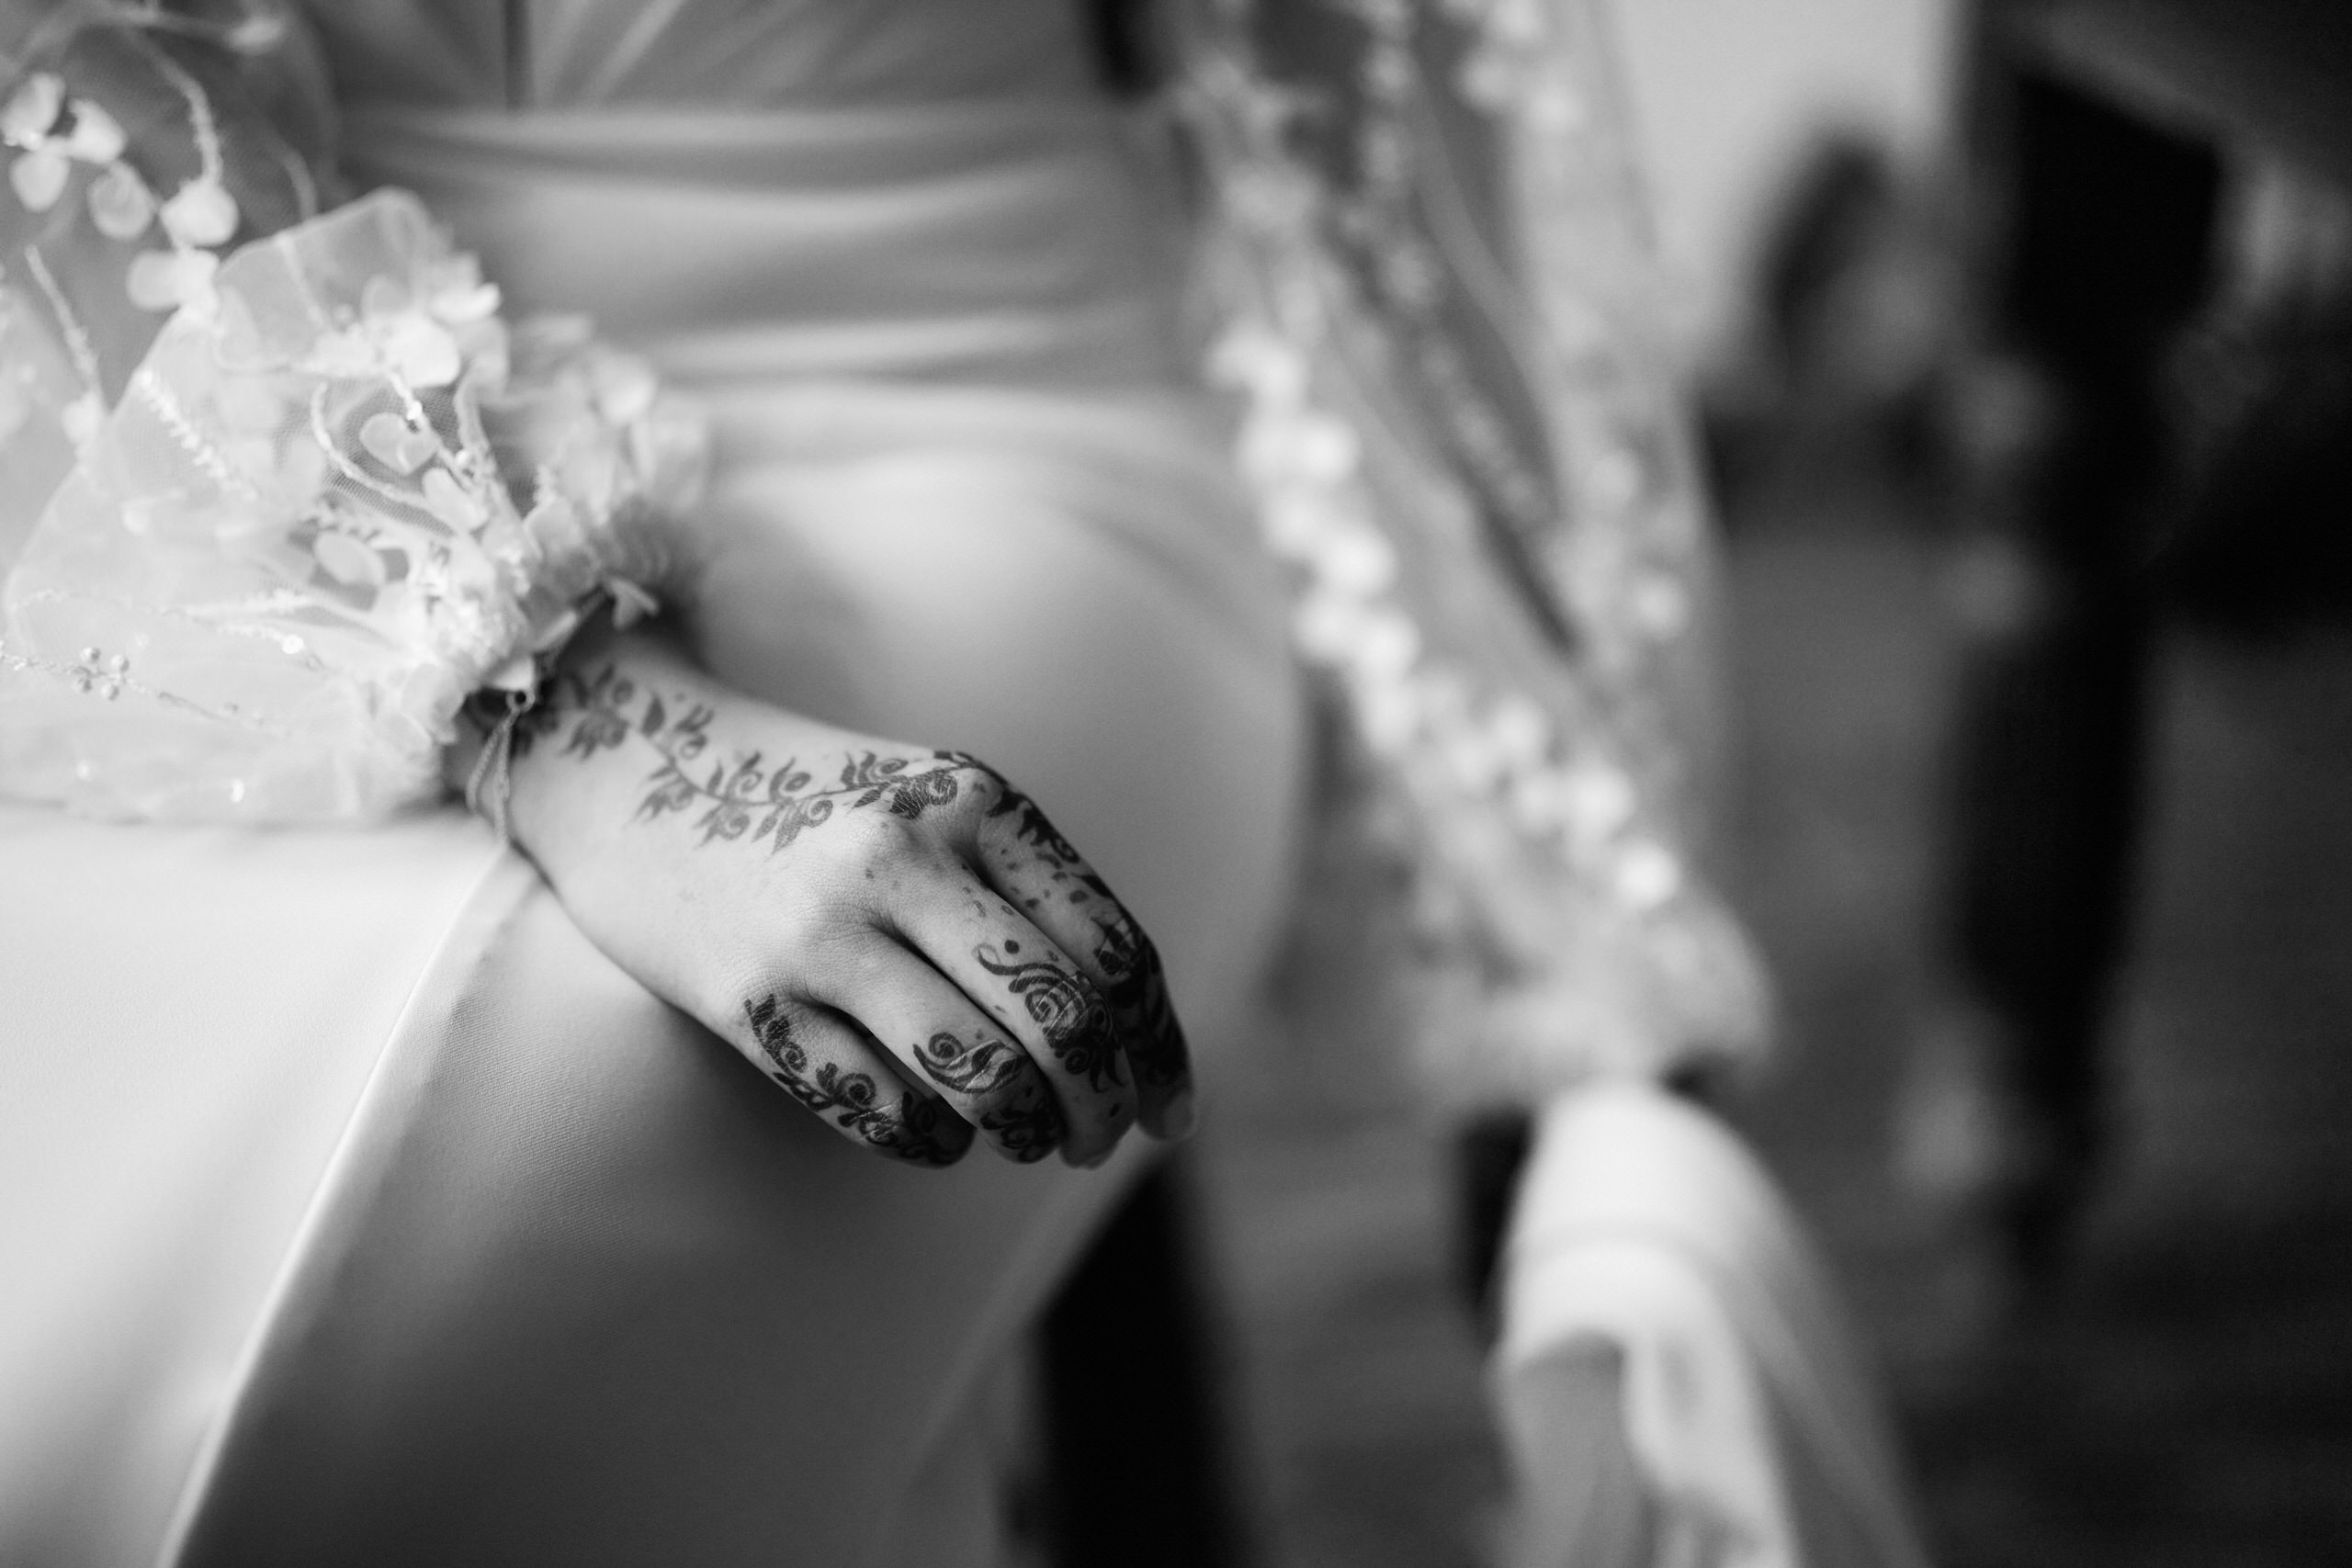 A picture in black and white of a bride's hand decorated with henna designs.